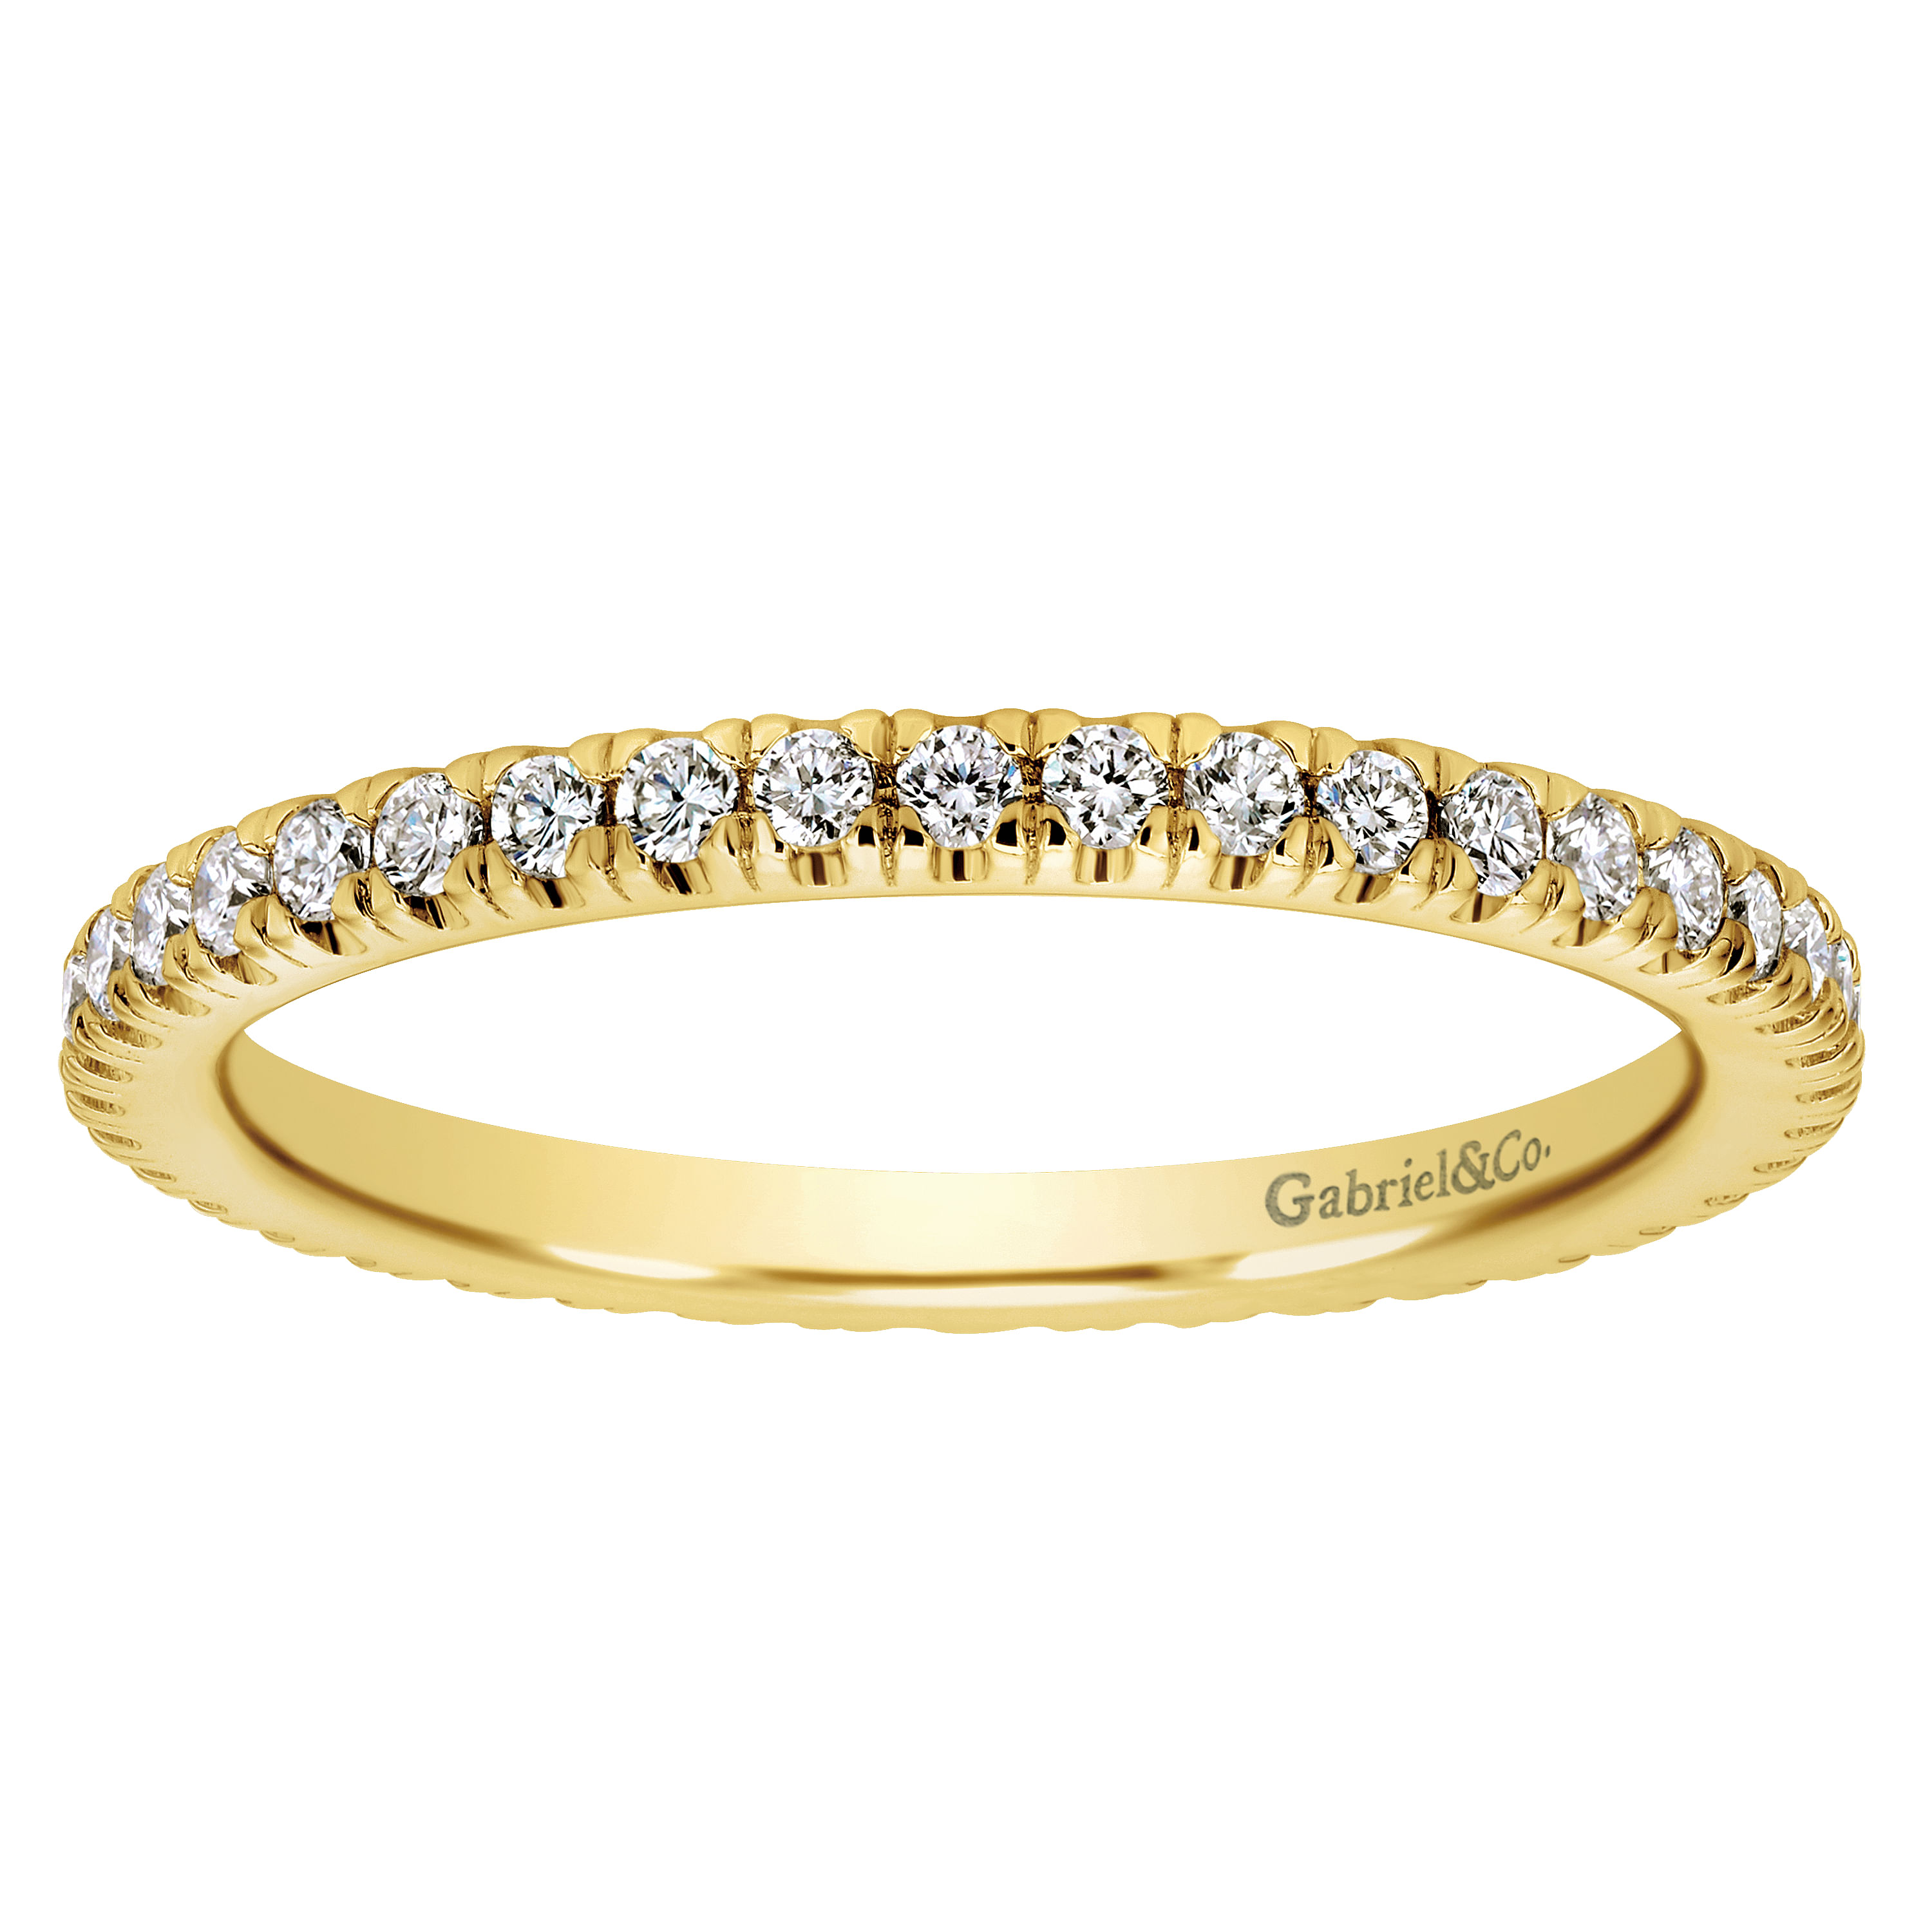 French Pavé  Eternity Diamond Ring in 14K Yellow Gold